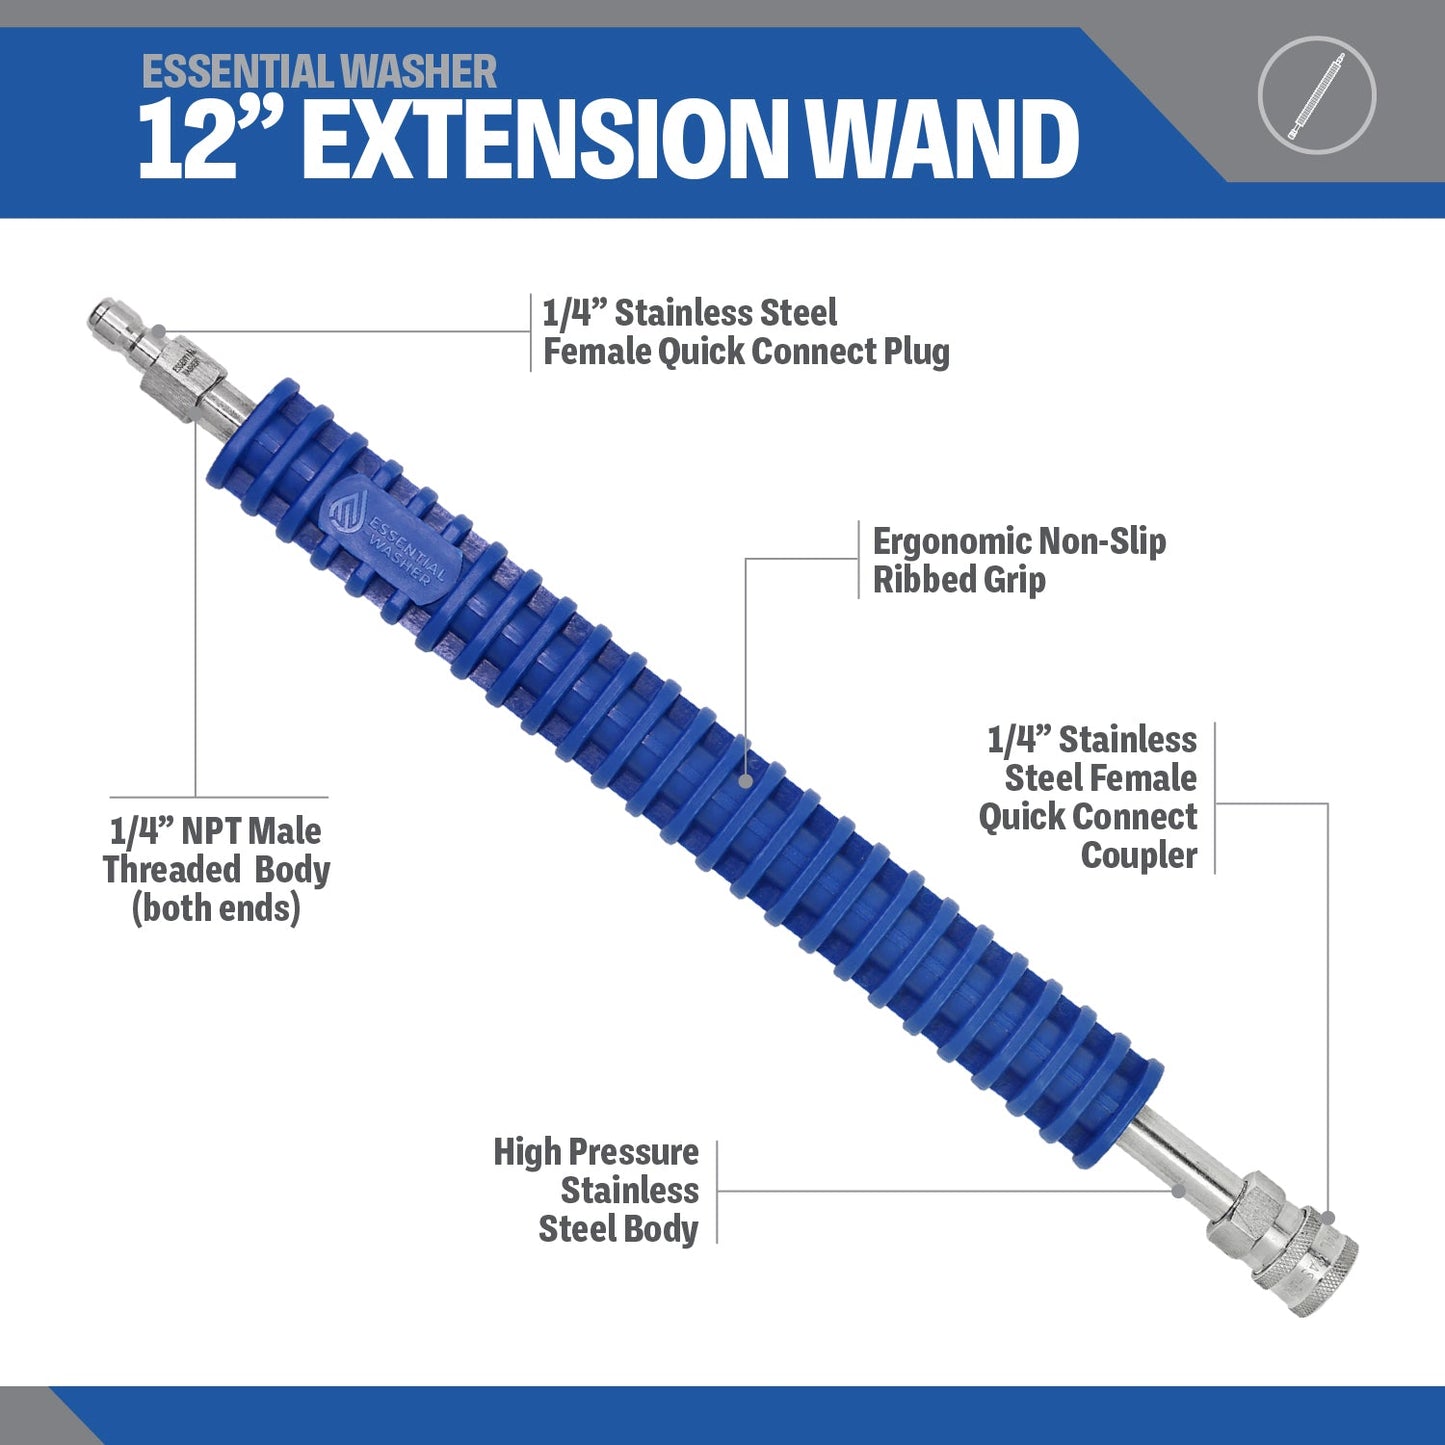 12" Professional Grade Pressure Washer Extension Wand | Stainless Steel With Fittings